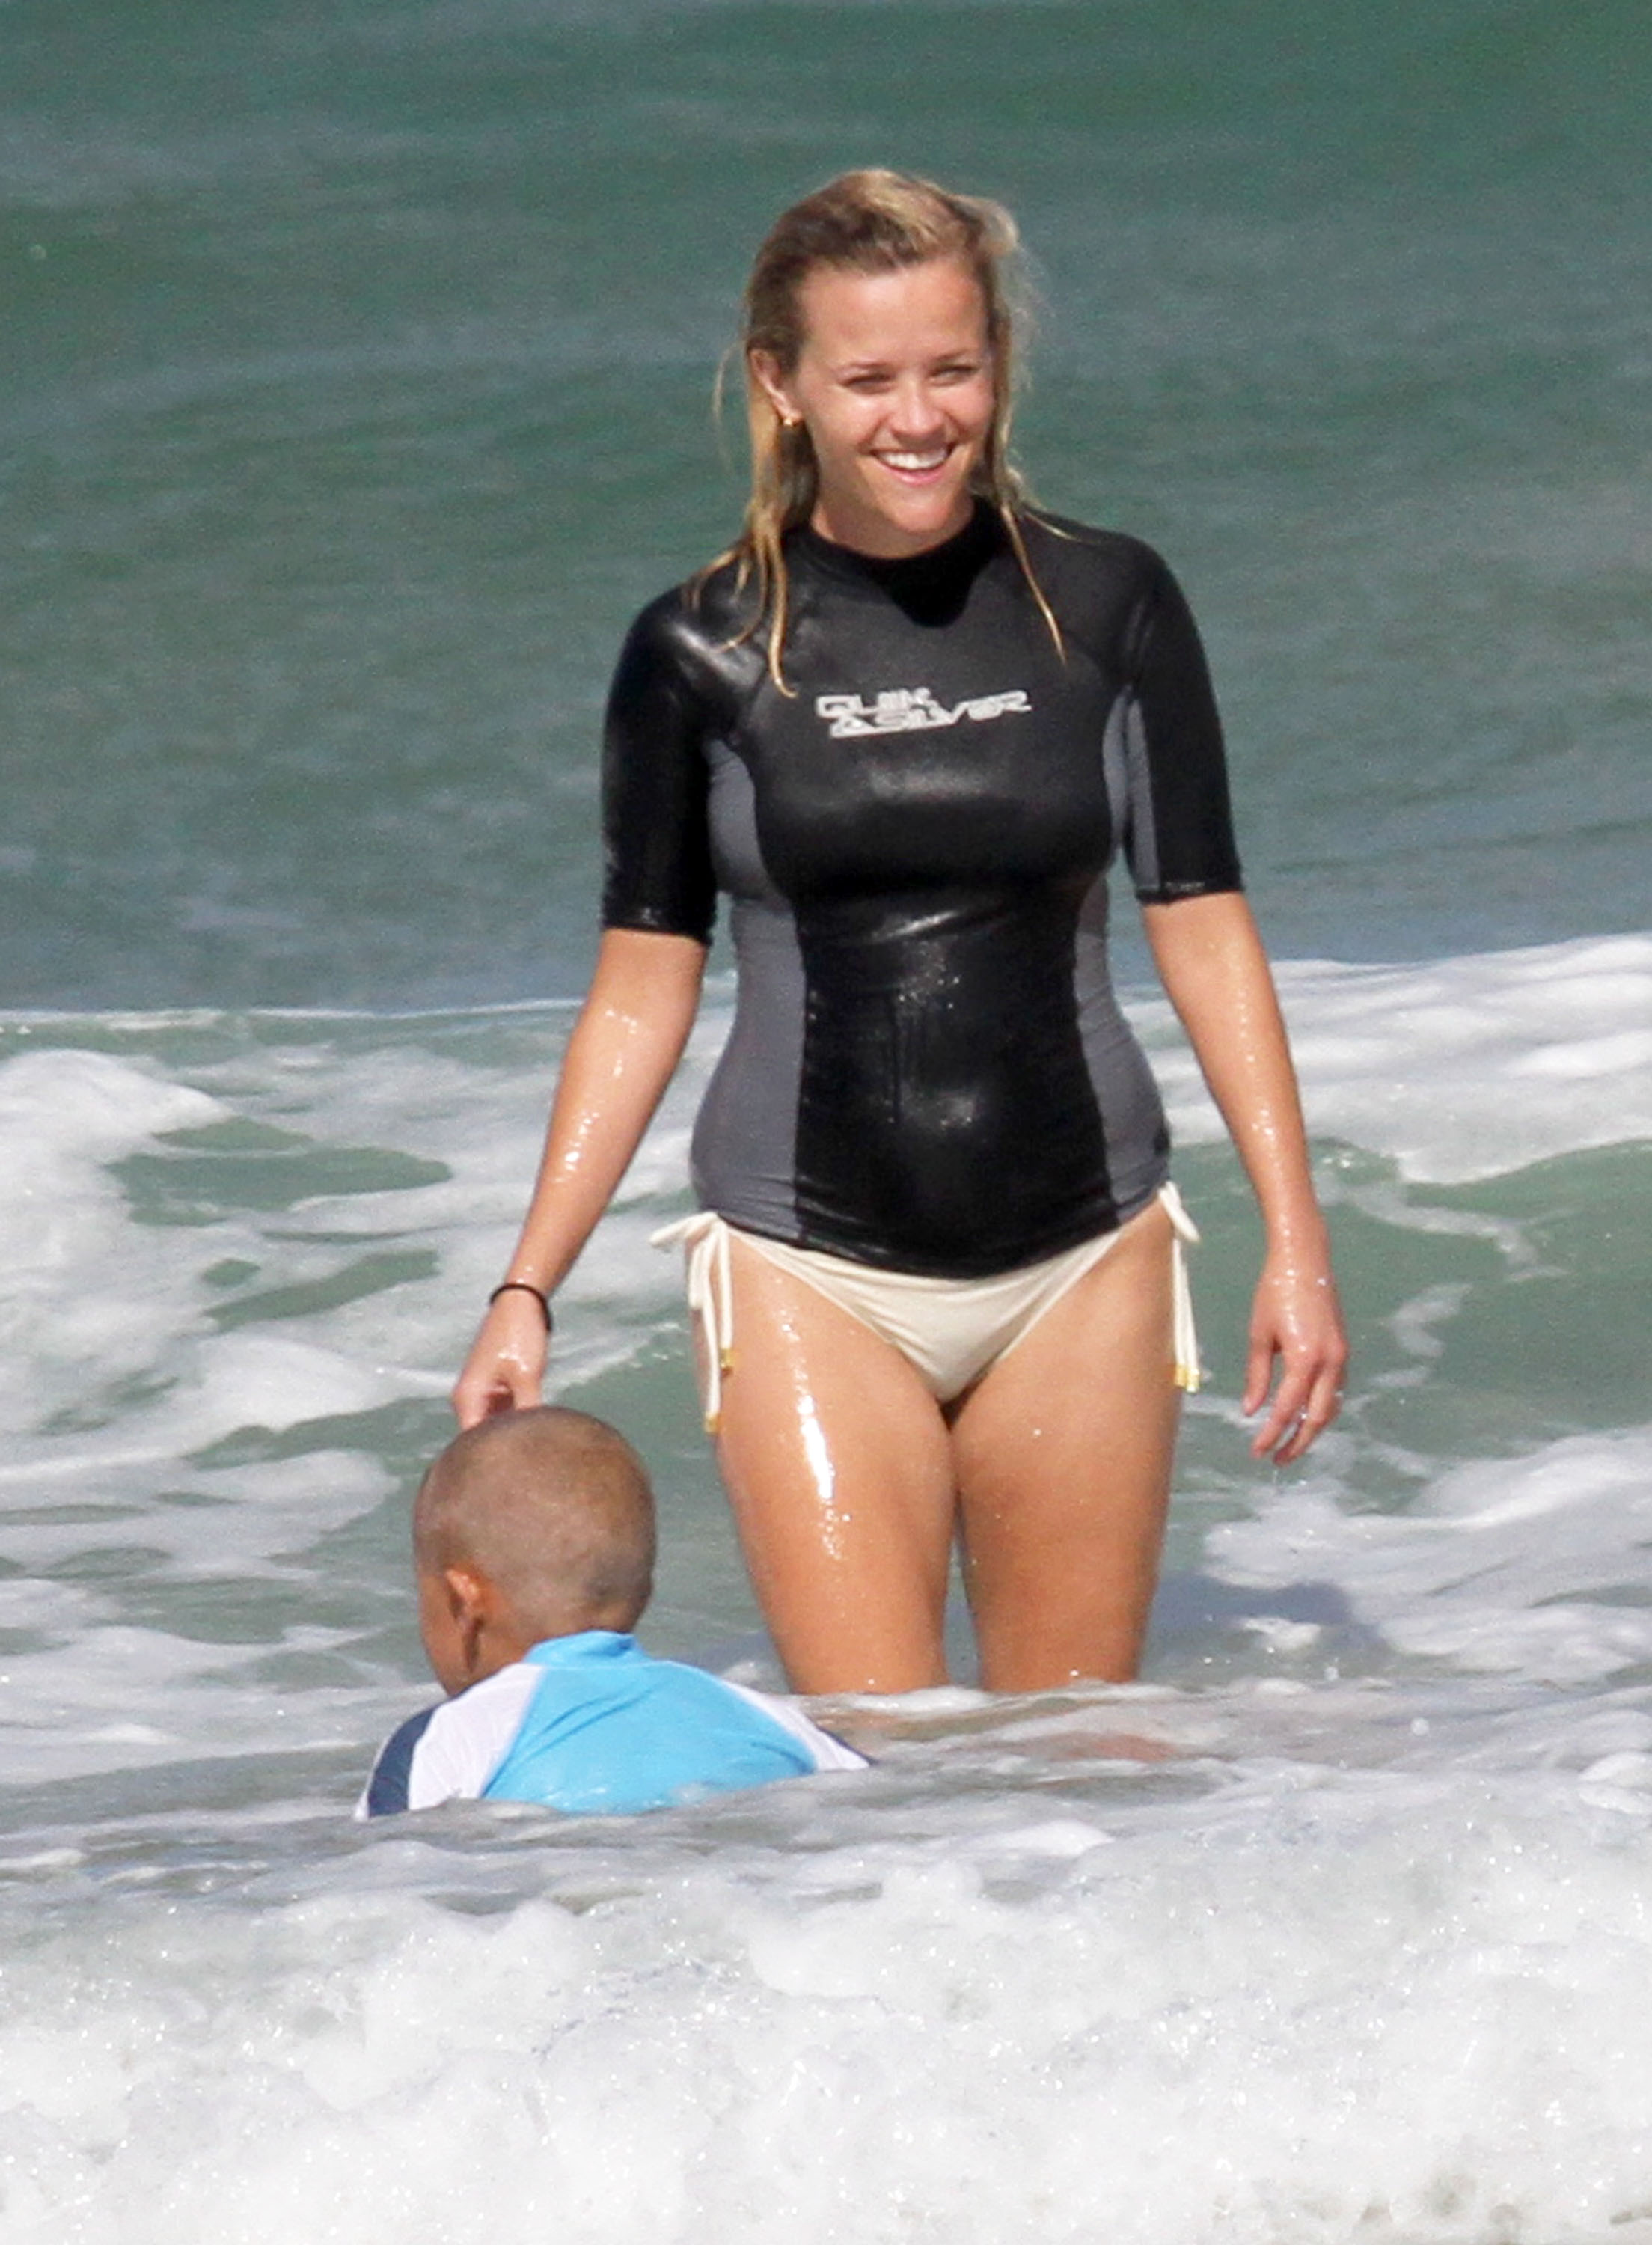 Reese Witherspoon 2011 : Reese Witherspoon - Surfing in Hawaii -05. 